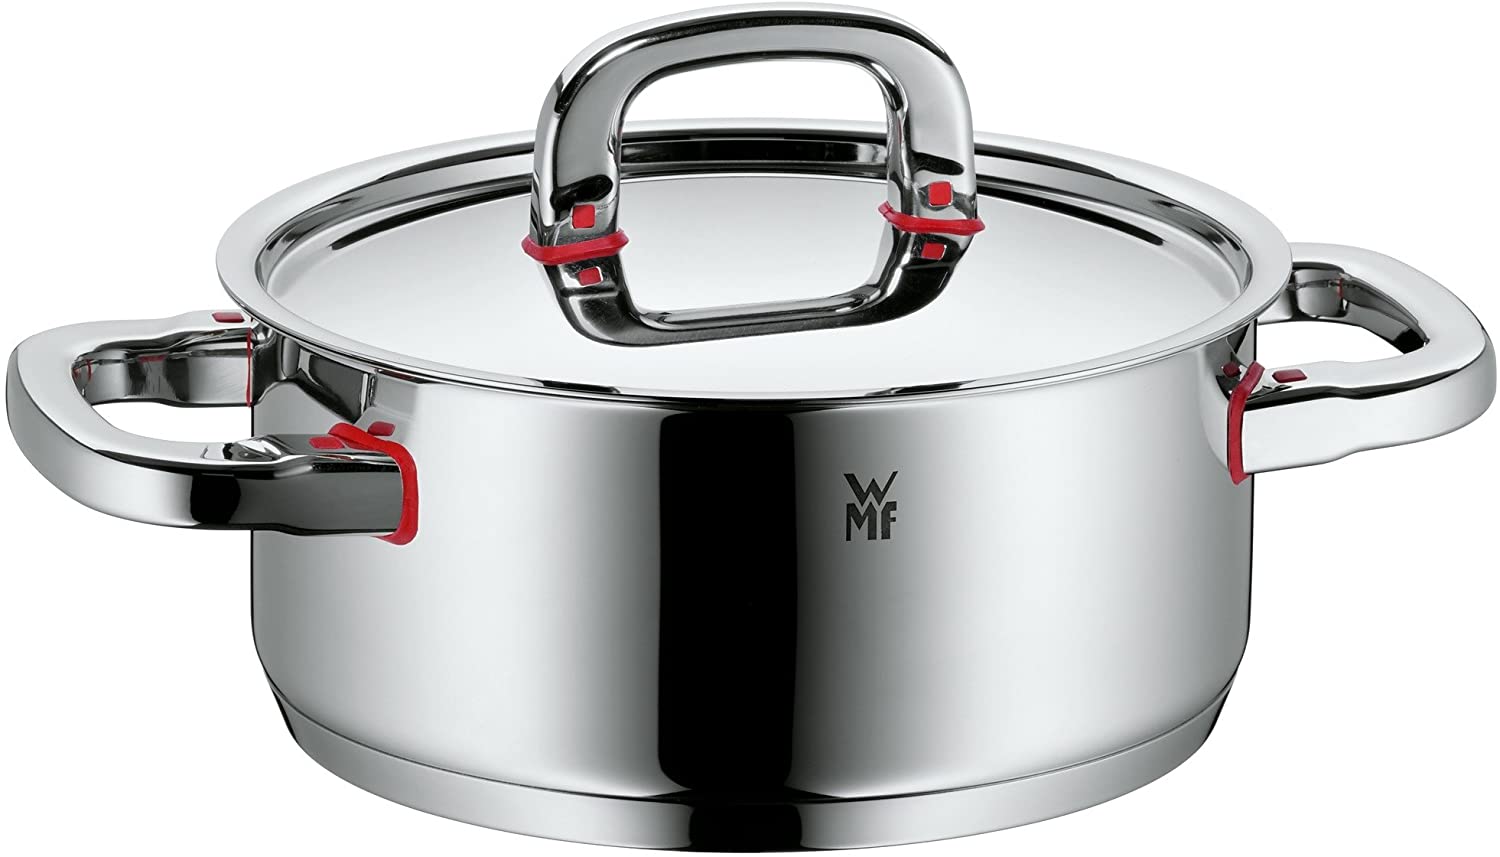 WMF Premium One 18/10 Stainless Steel 20cm Low Casserole with Lid